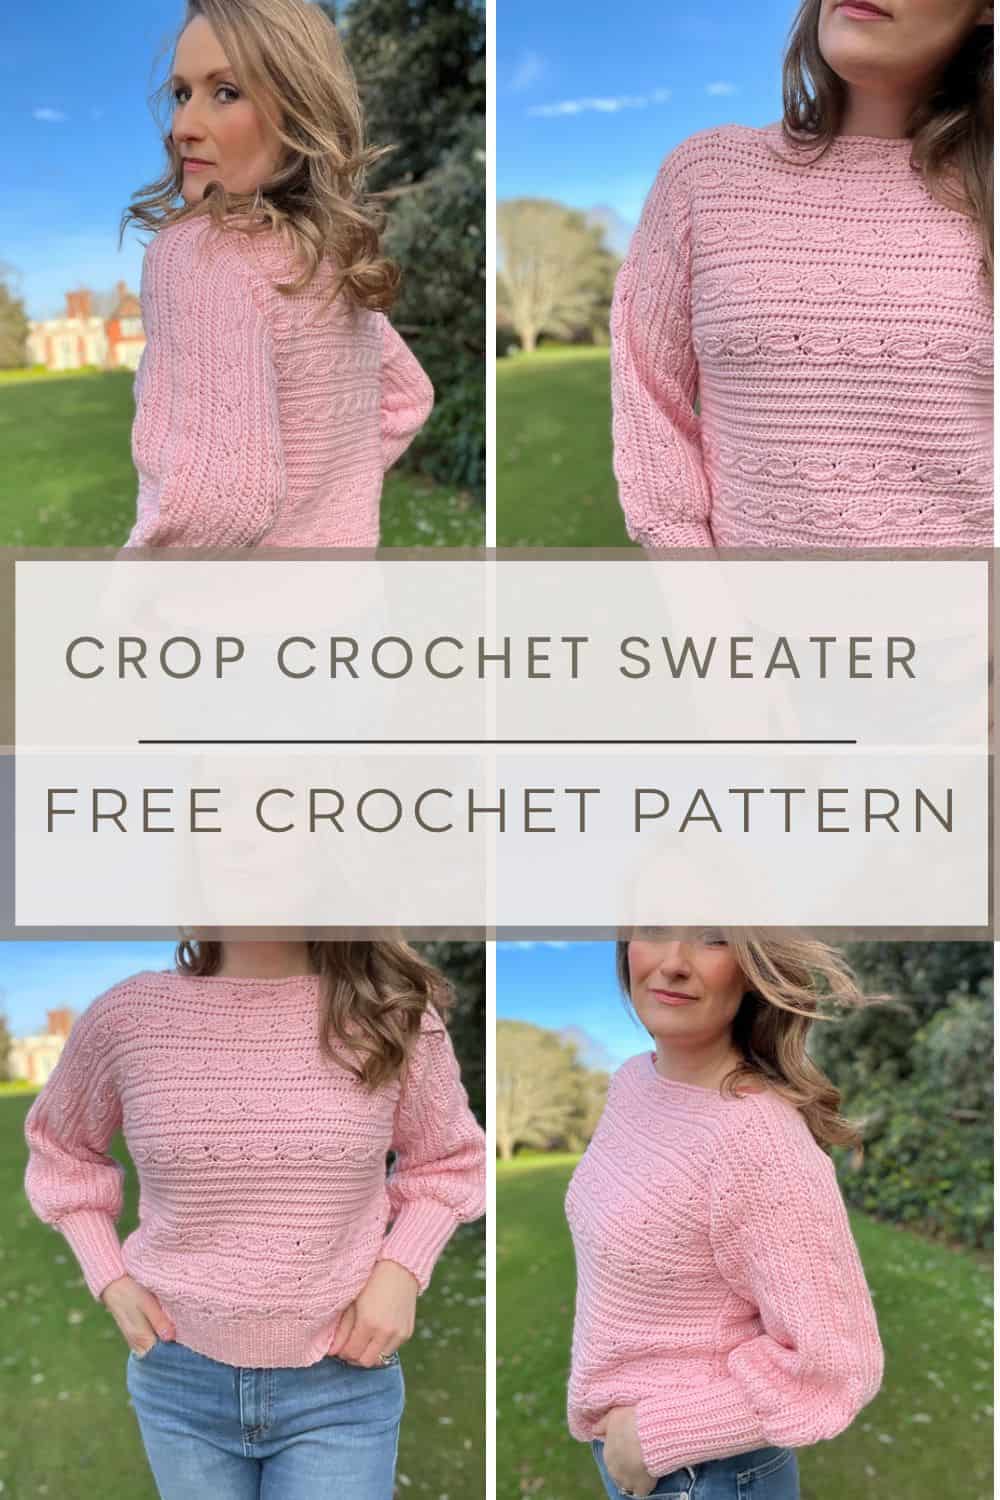 13 Free Crochet Sweater Patterns for the Holiday Season - Cream Of The Crop  Crochet